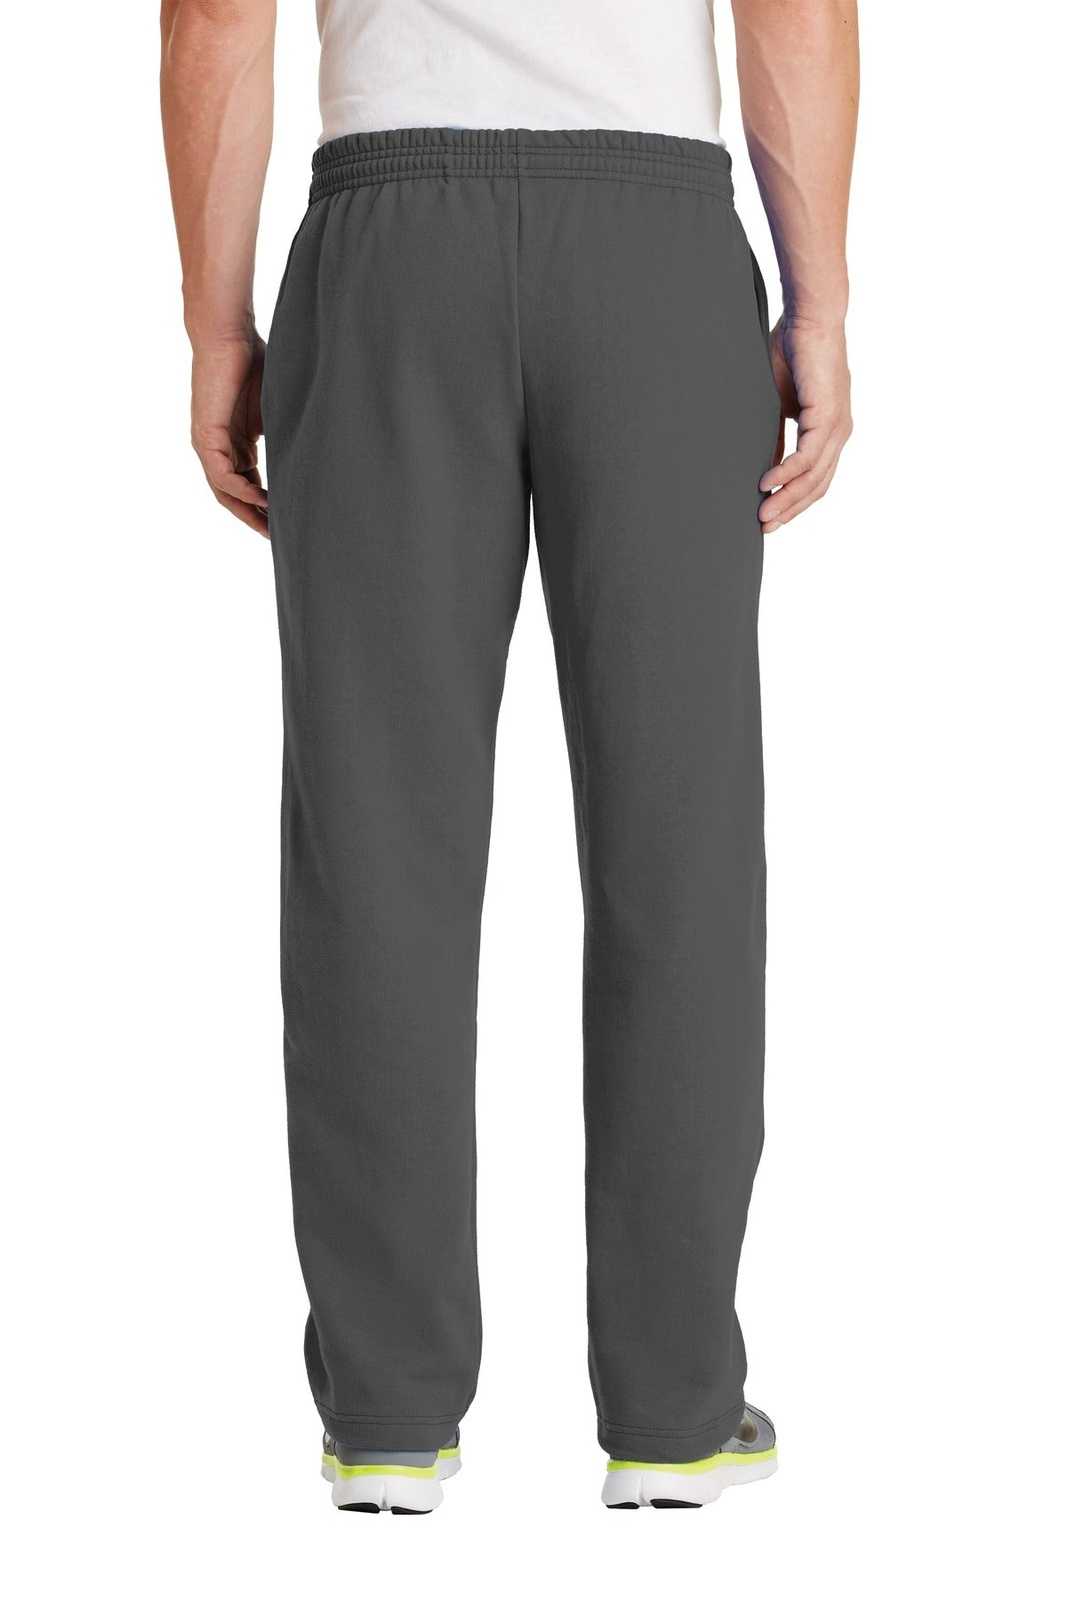 Port &amp; Company PC78P Core Fleece Sweatpant with Pockets - Charcoal - HIT a Double - 2